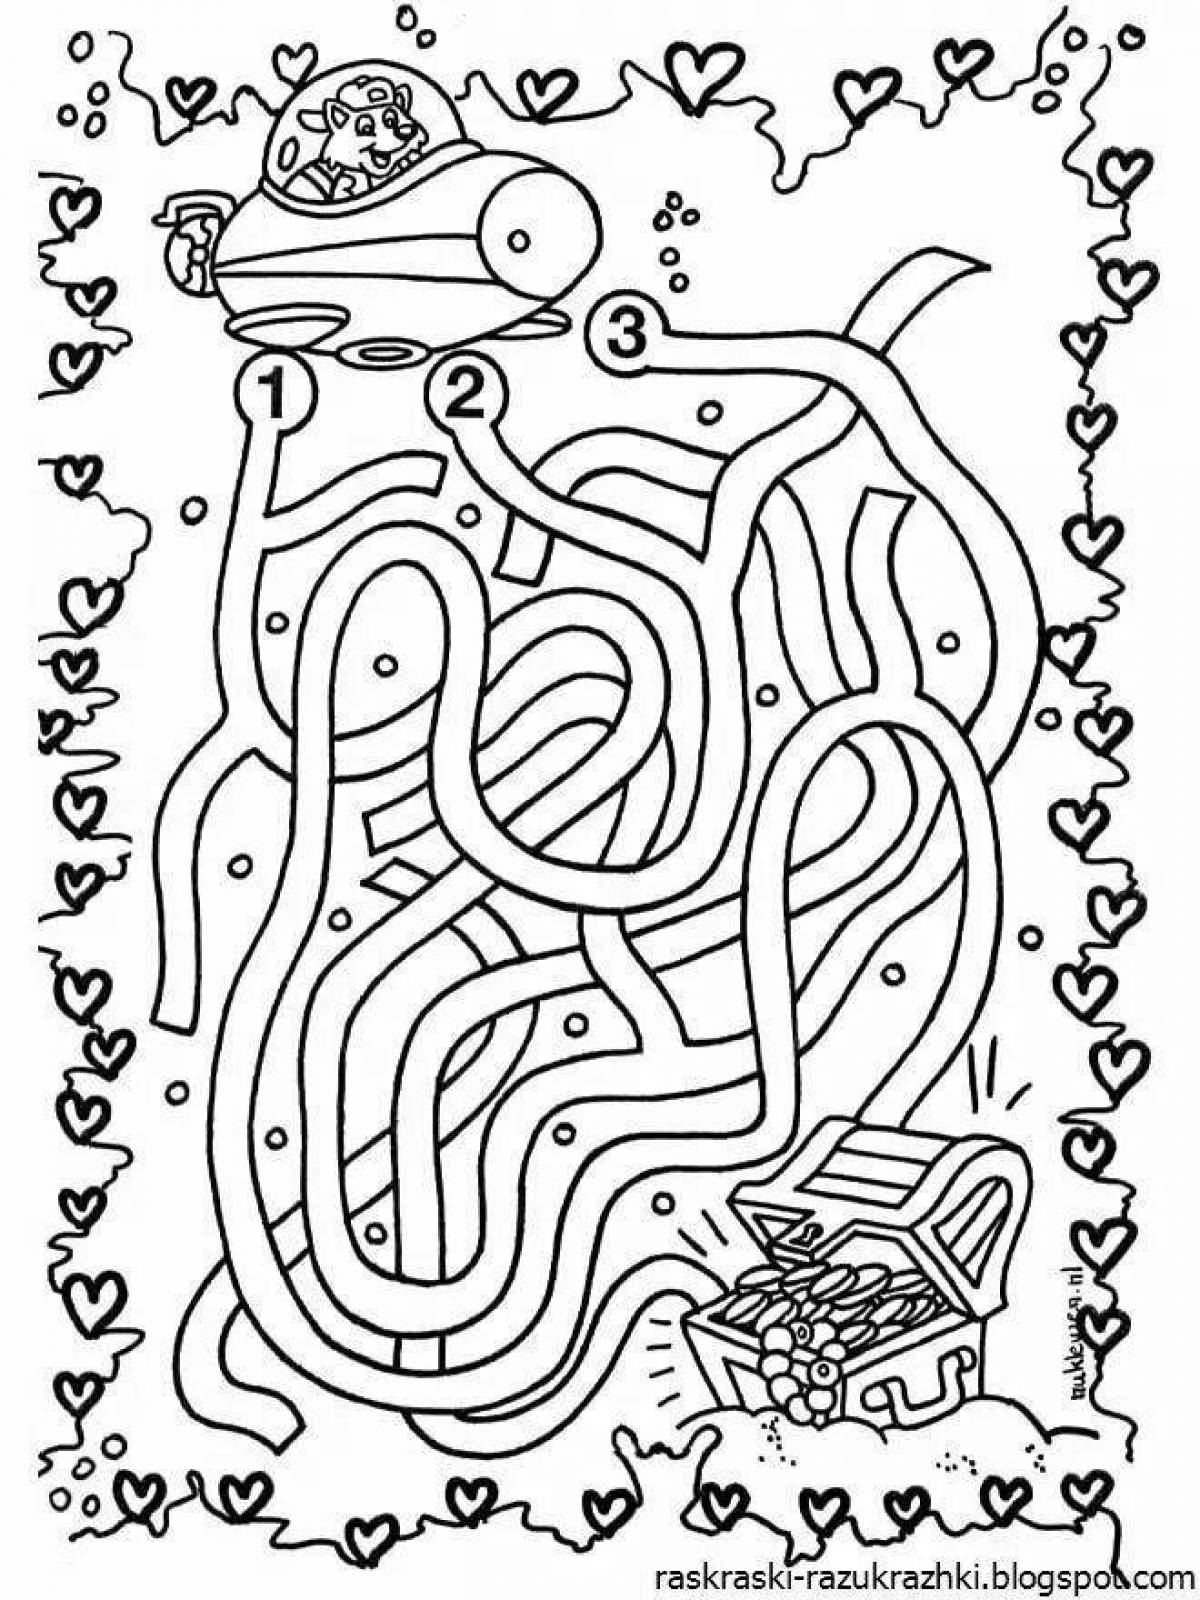 Vibrant maze coloring book for kids